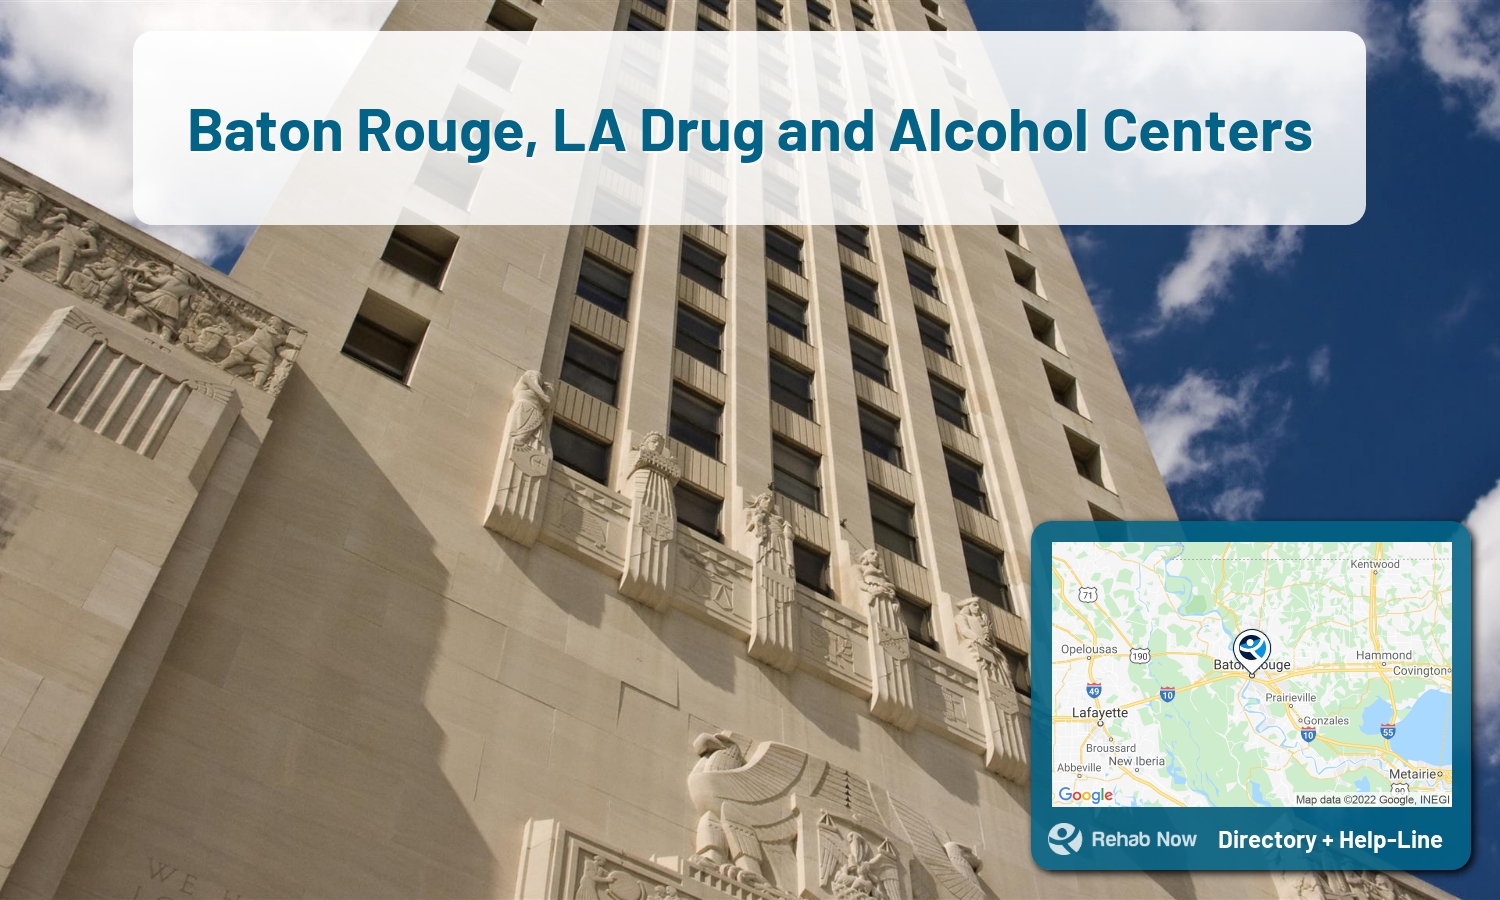 Baton Rouge, LA Treatment Centers. Find drug rehab in Baton Rouge, Louisiana, or detox and treatment programs. Get the right help now!